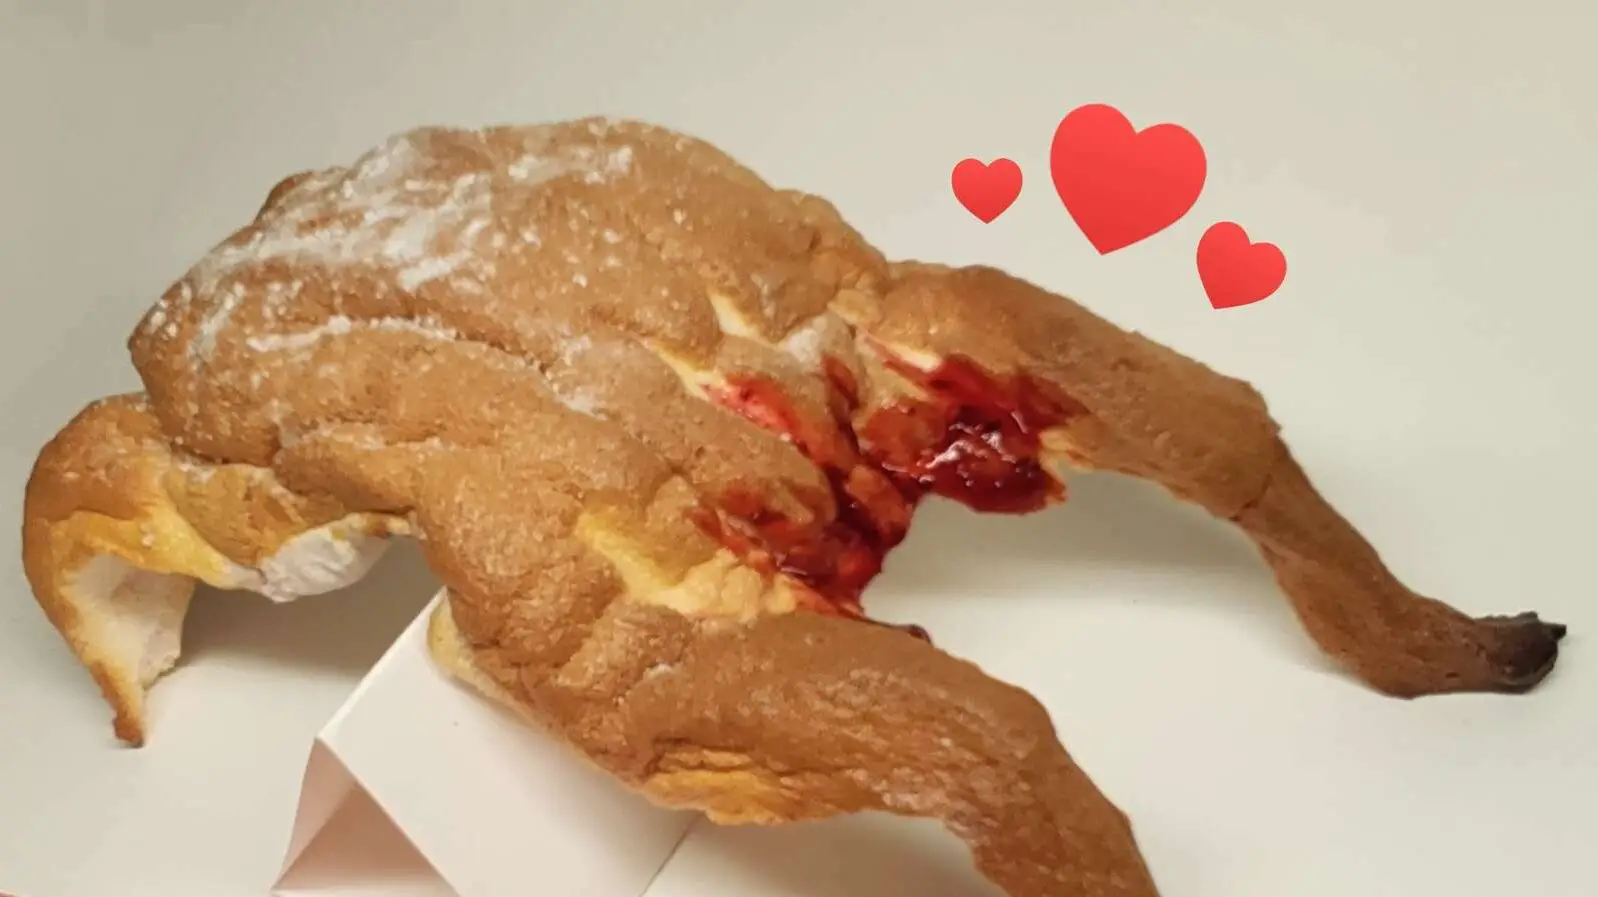 This edible headcrab is delicious and disturbing